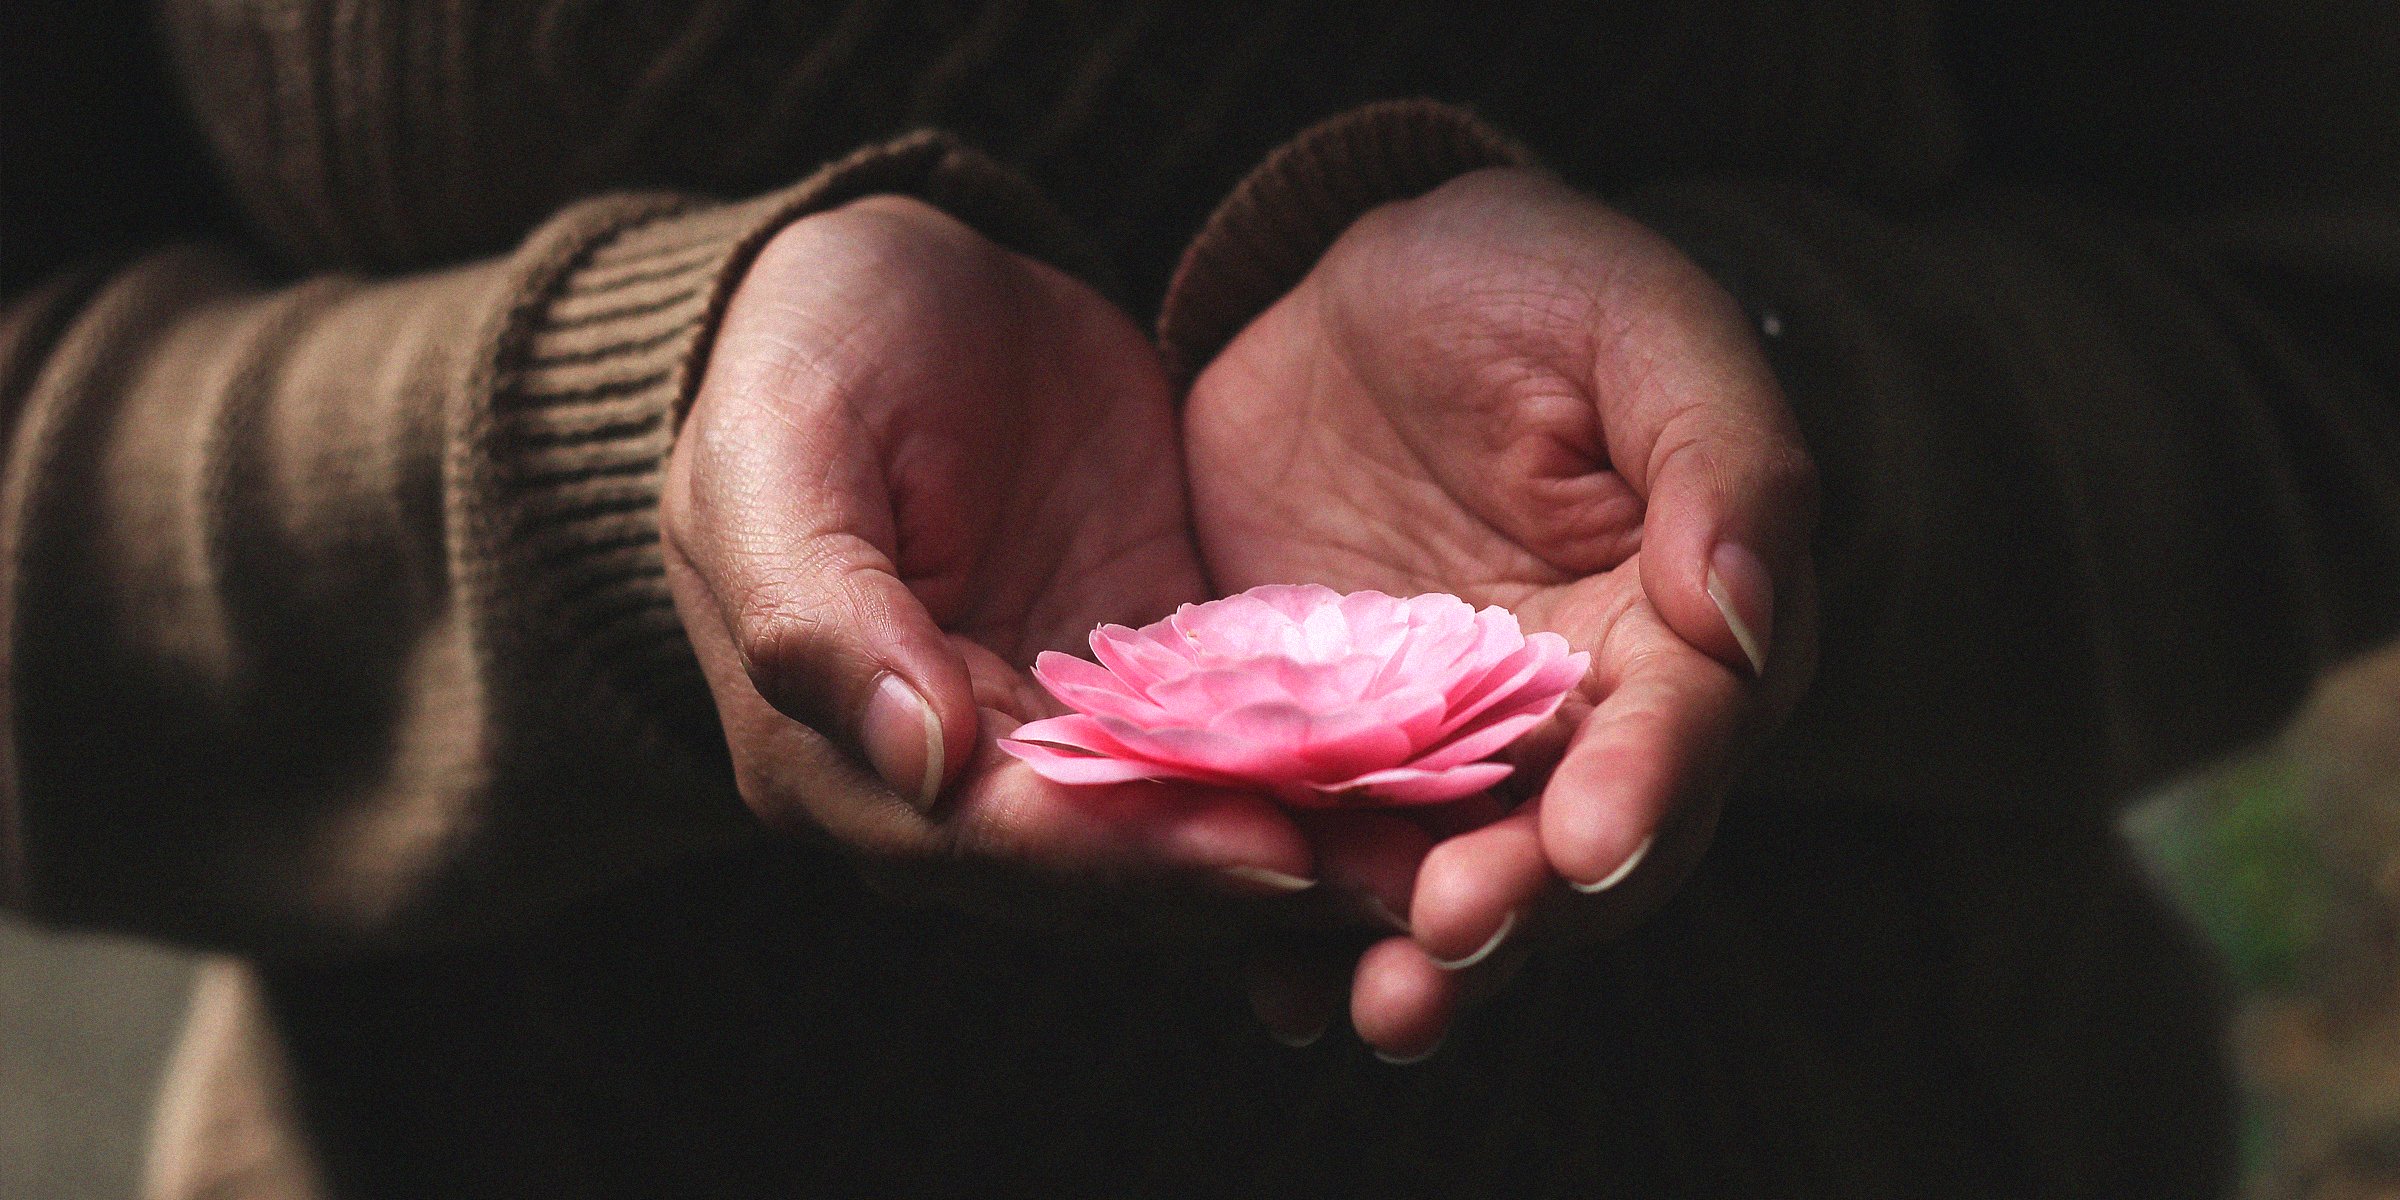 Unsplash | An individual cupping a flower in their hands